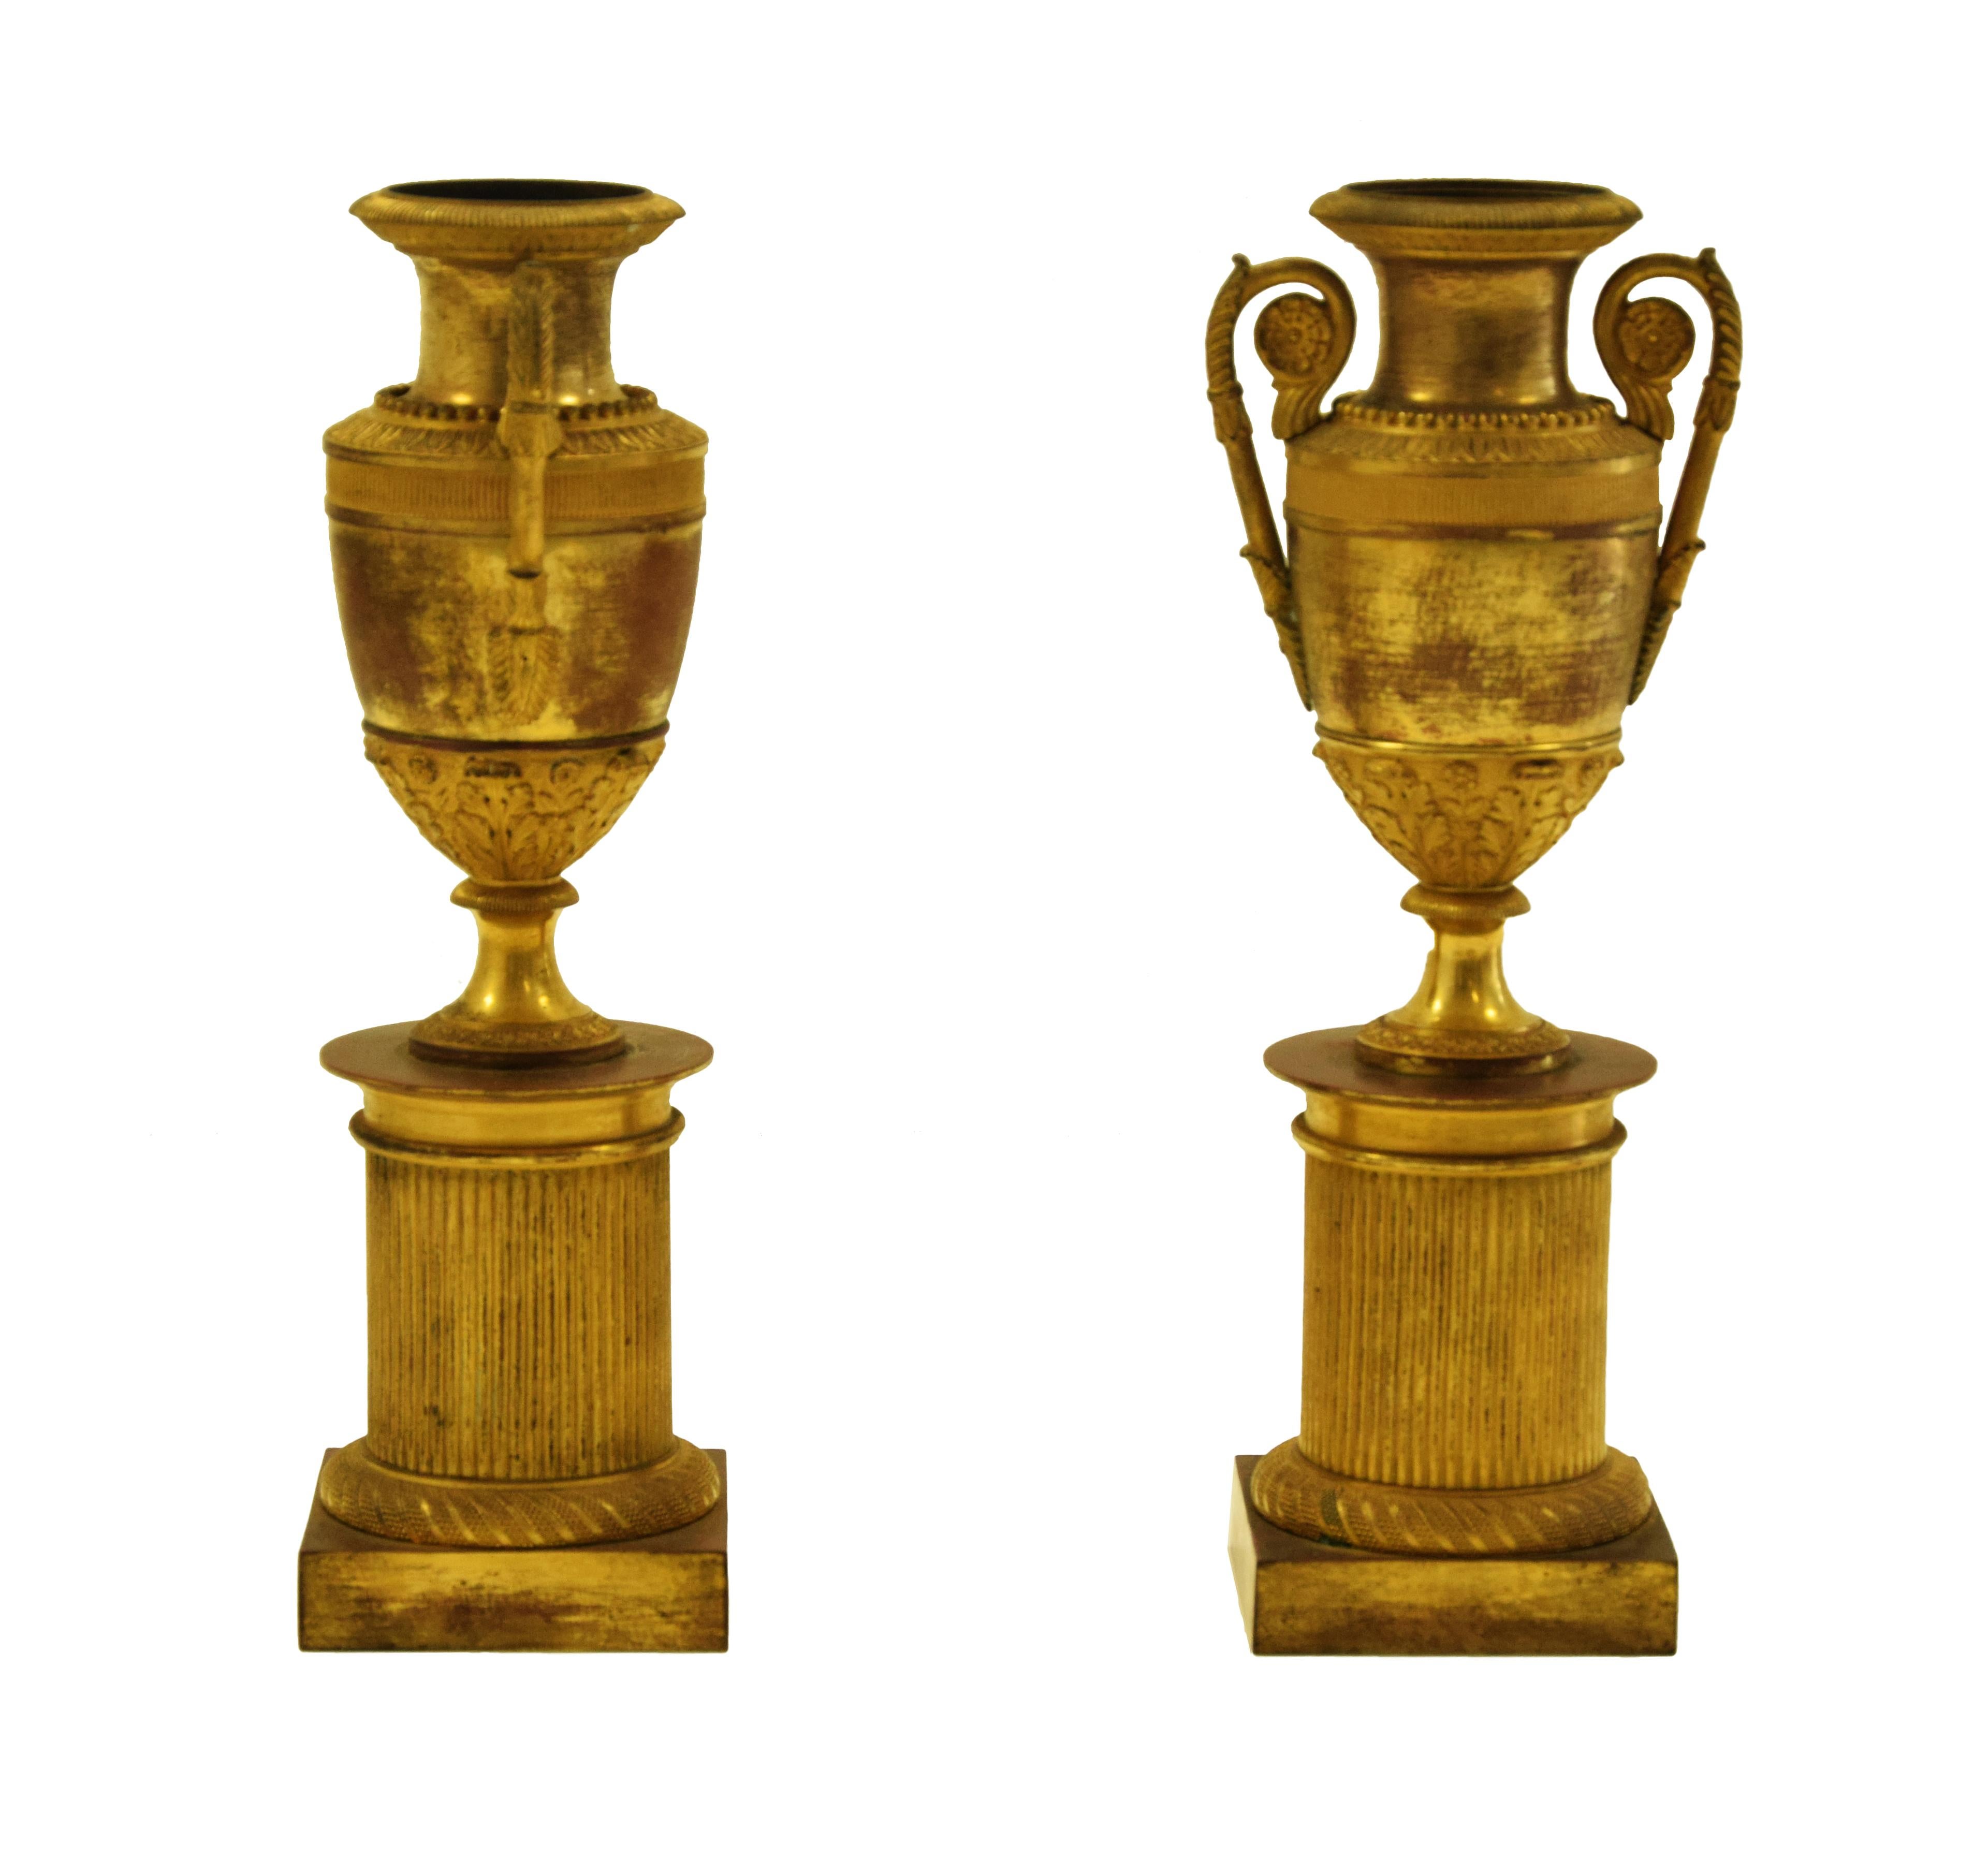 Pair of vases on plinth is an original decorative object realized in the second half of the 19th century.

Original gilded bronze.

Ancient gold patina.

Mint conditions.

Beautiful pair of vases realized with a cylindrical fluted base and a